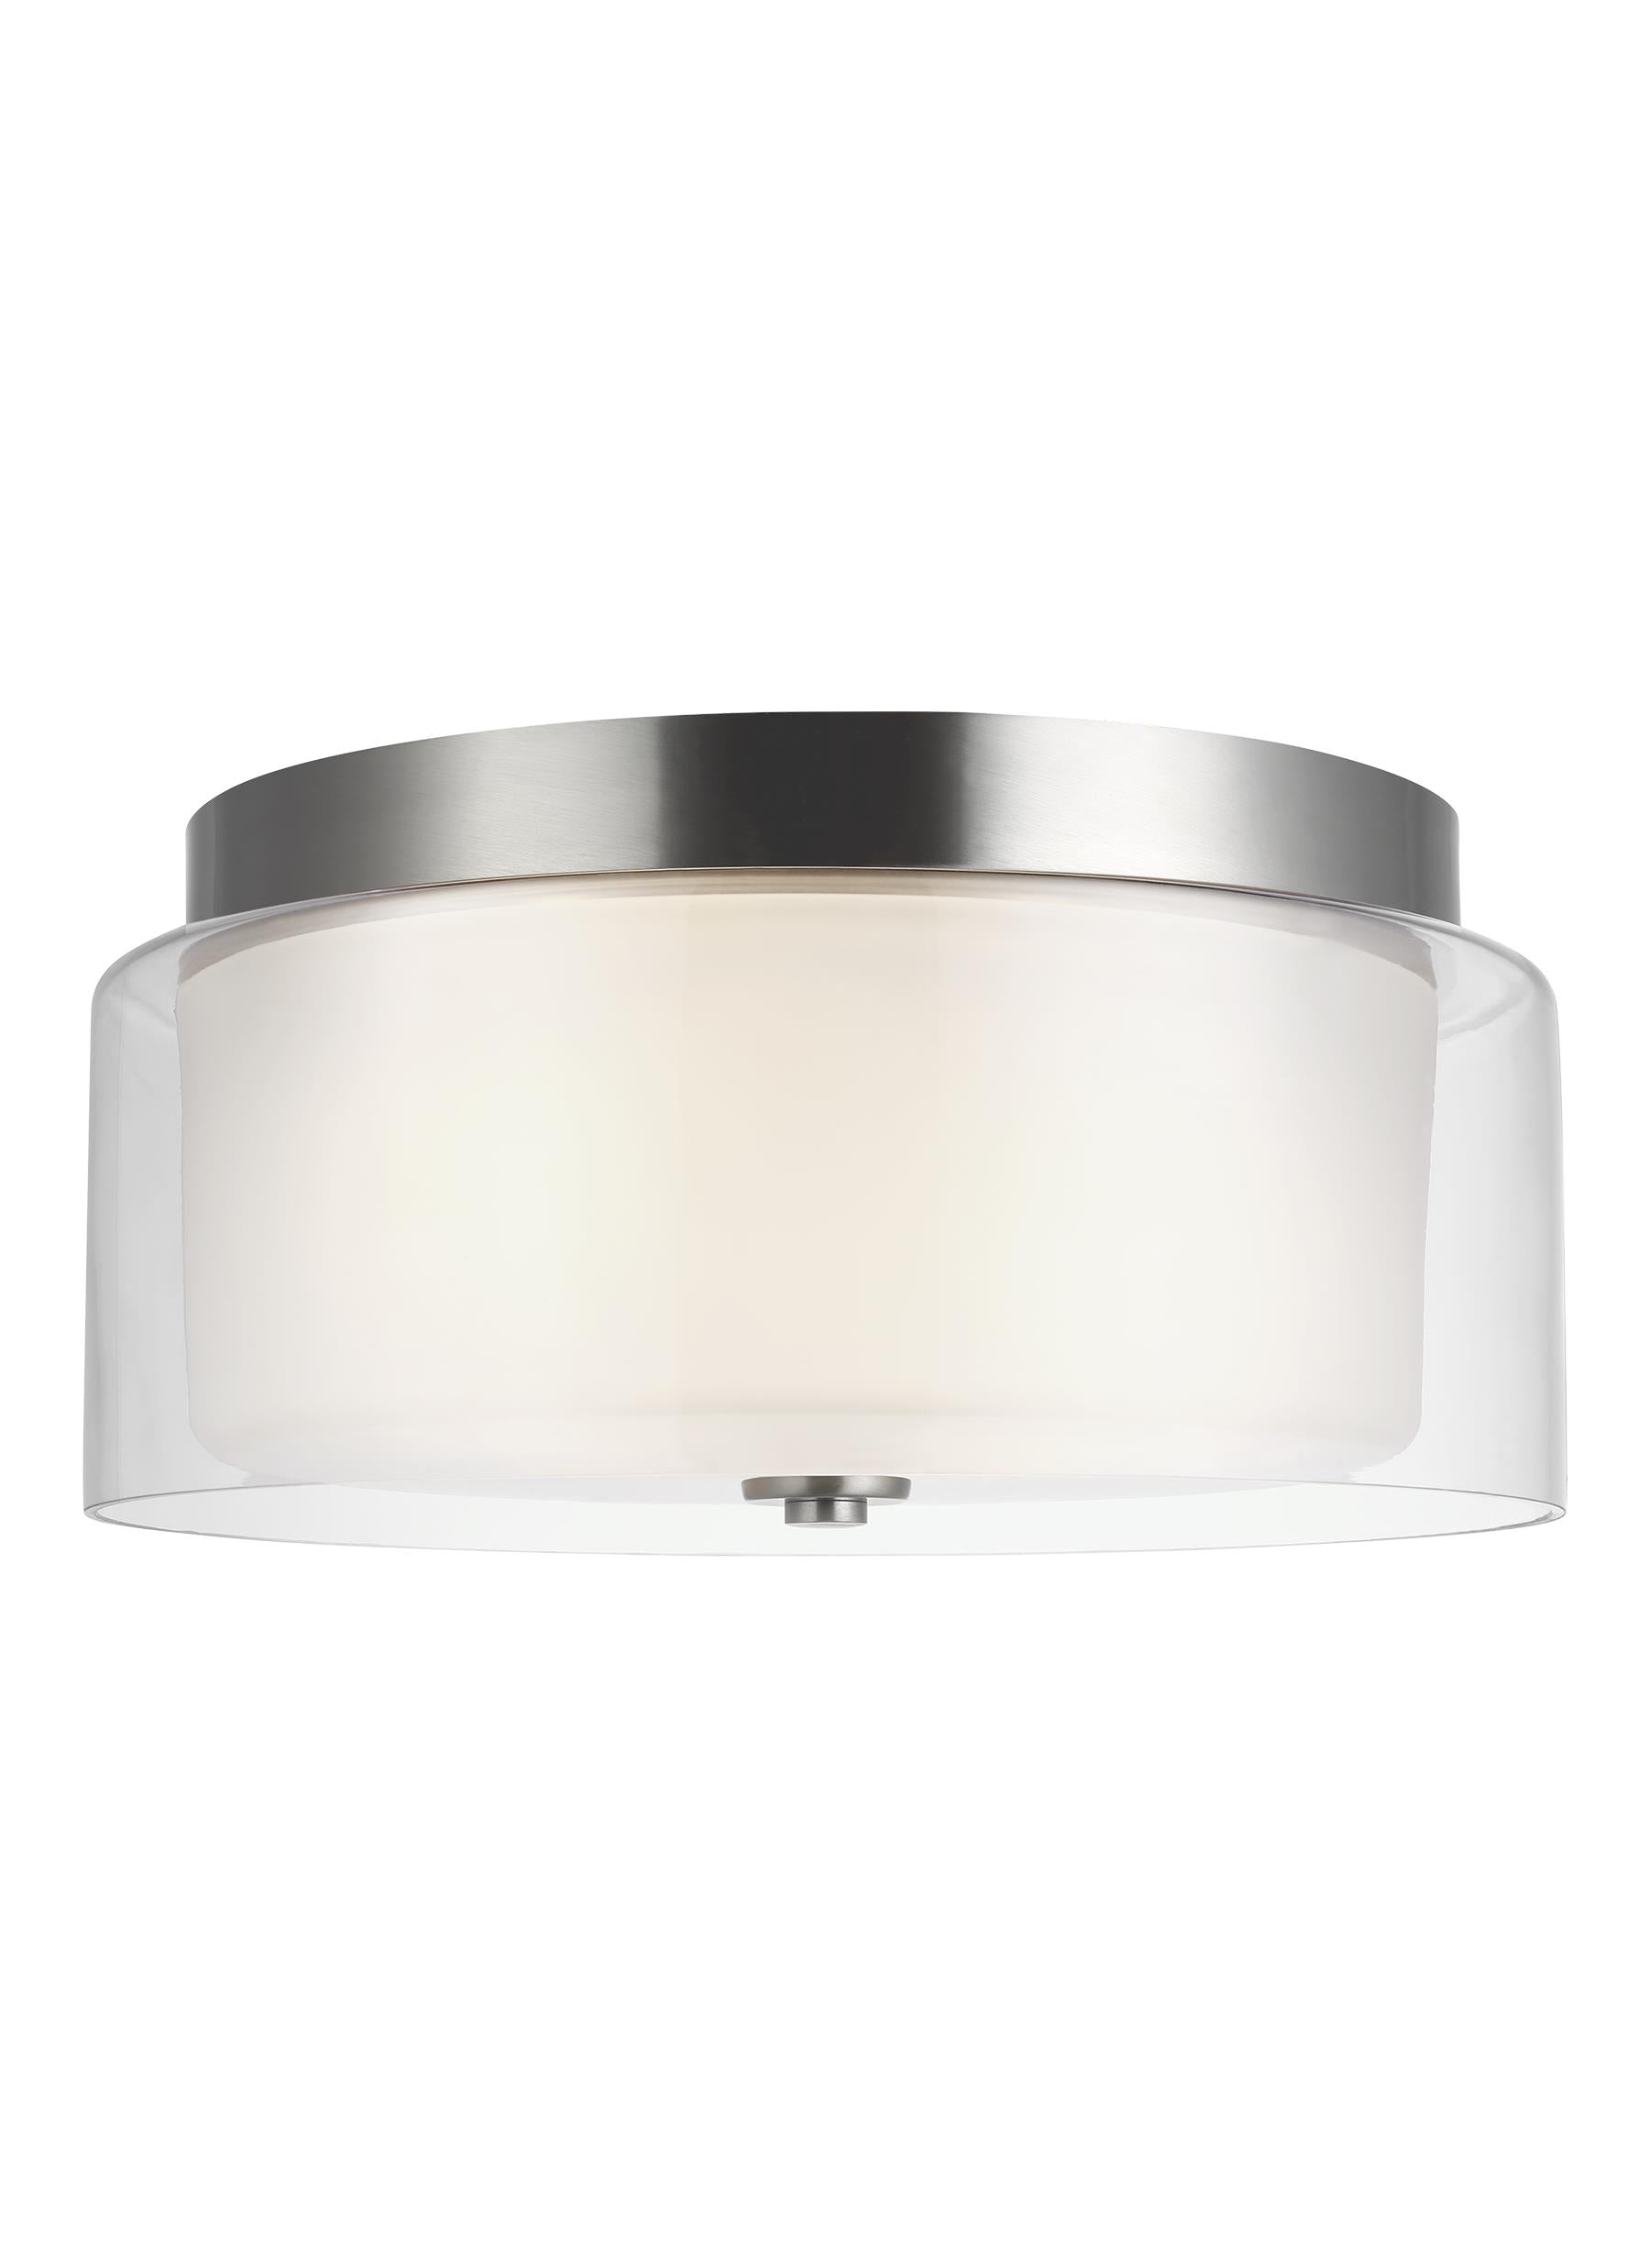 Elmwood Park traditional 2-light indoor dimmable ceiling semi-flush mount in brushed nickel silver finish with satin etche...